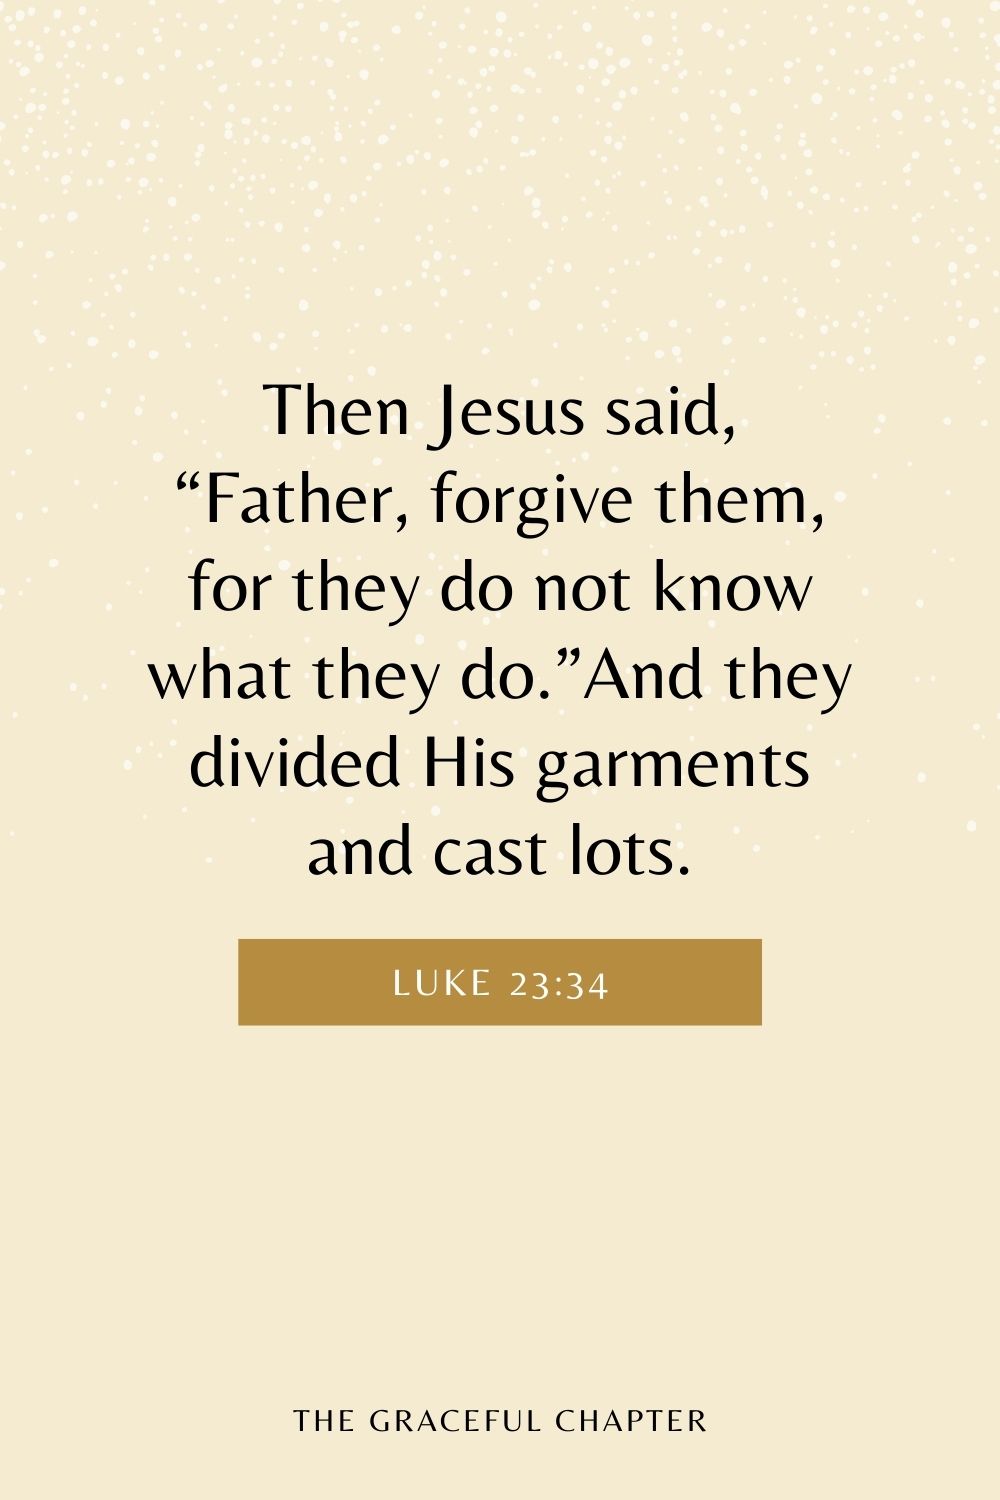 Then Jesus said, “Father, forgive them, for they do not know what they do.”And they divided His garments and cast lots. Luke 23:34